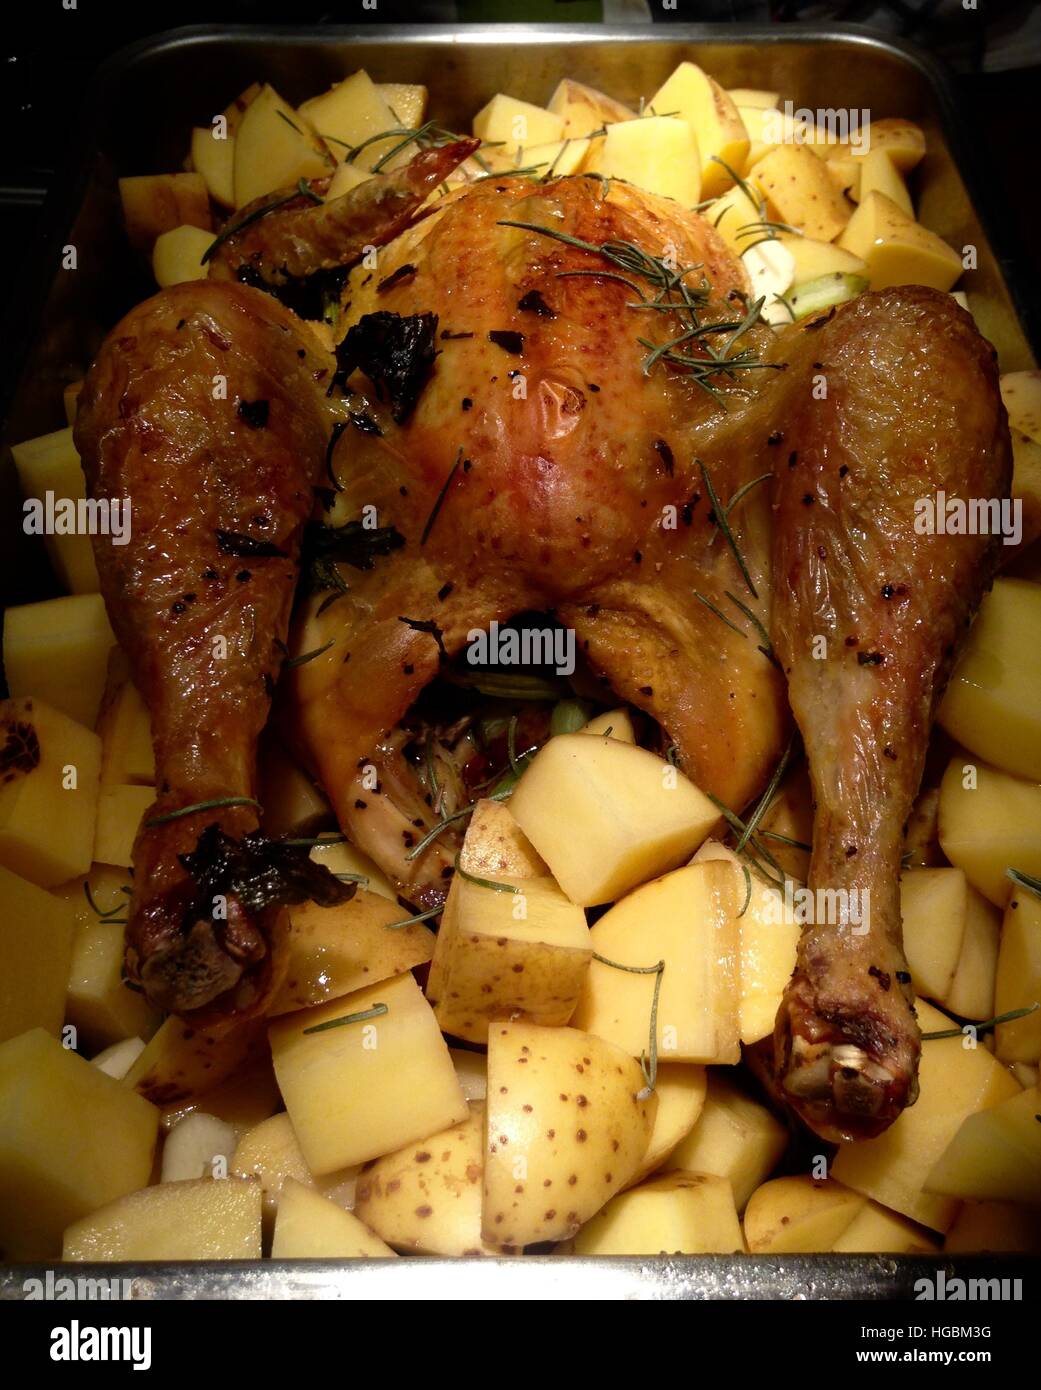 Chicken with herbs and baked potatoes Stock Photo